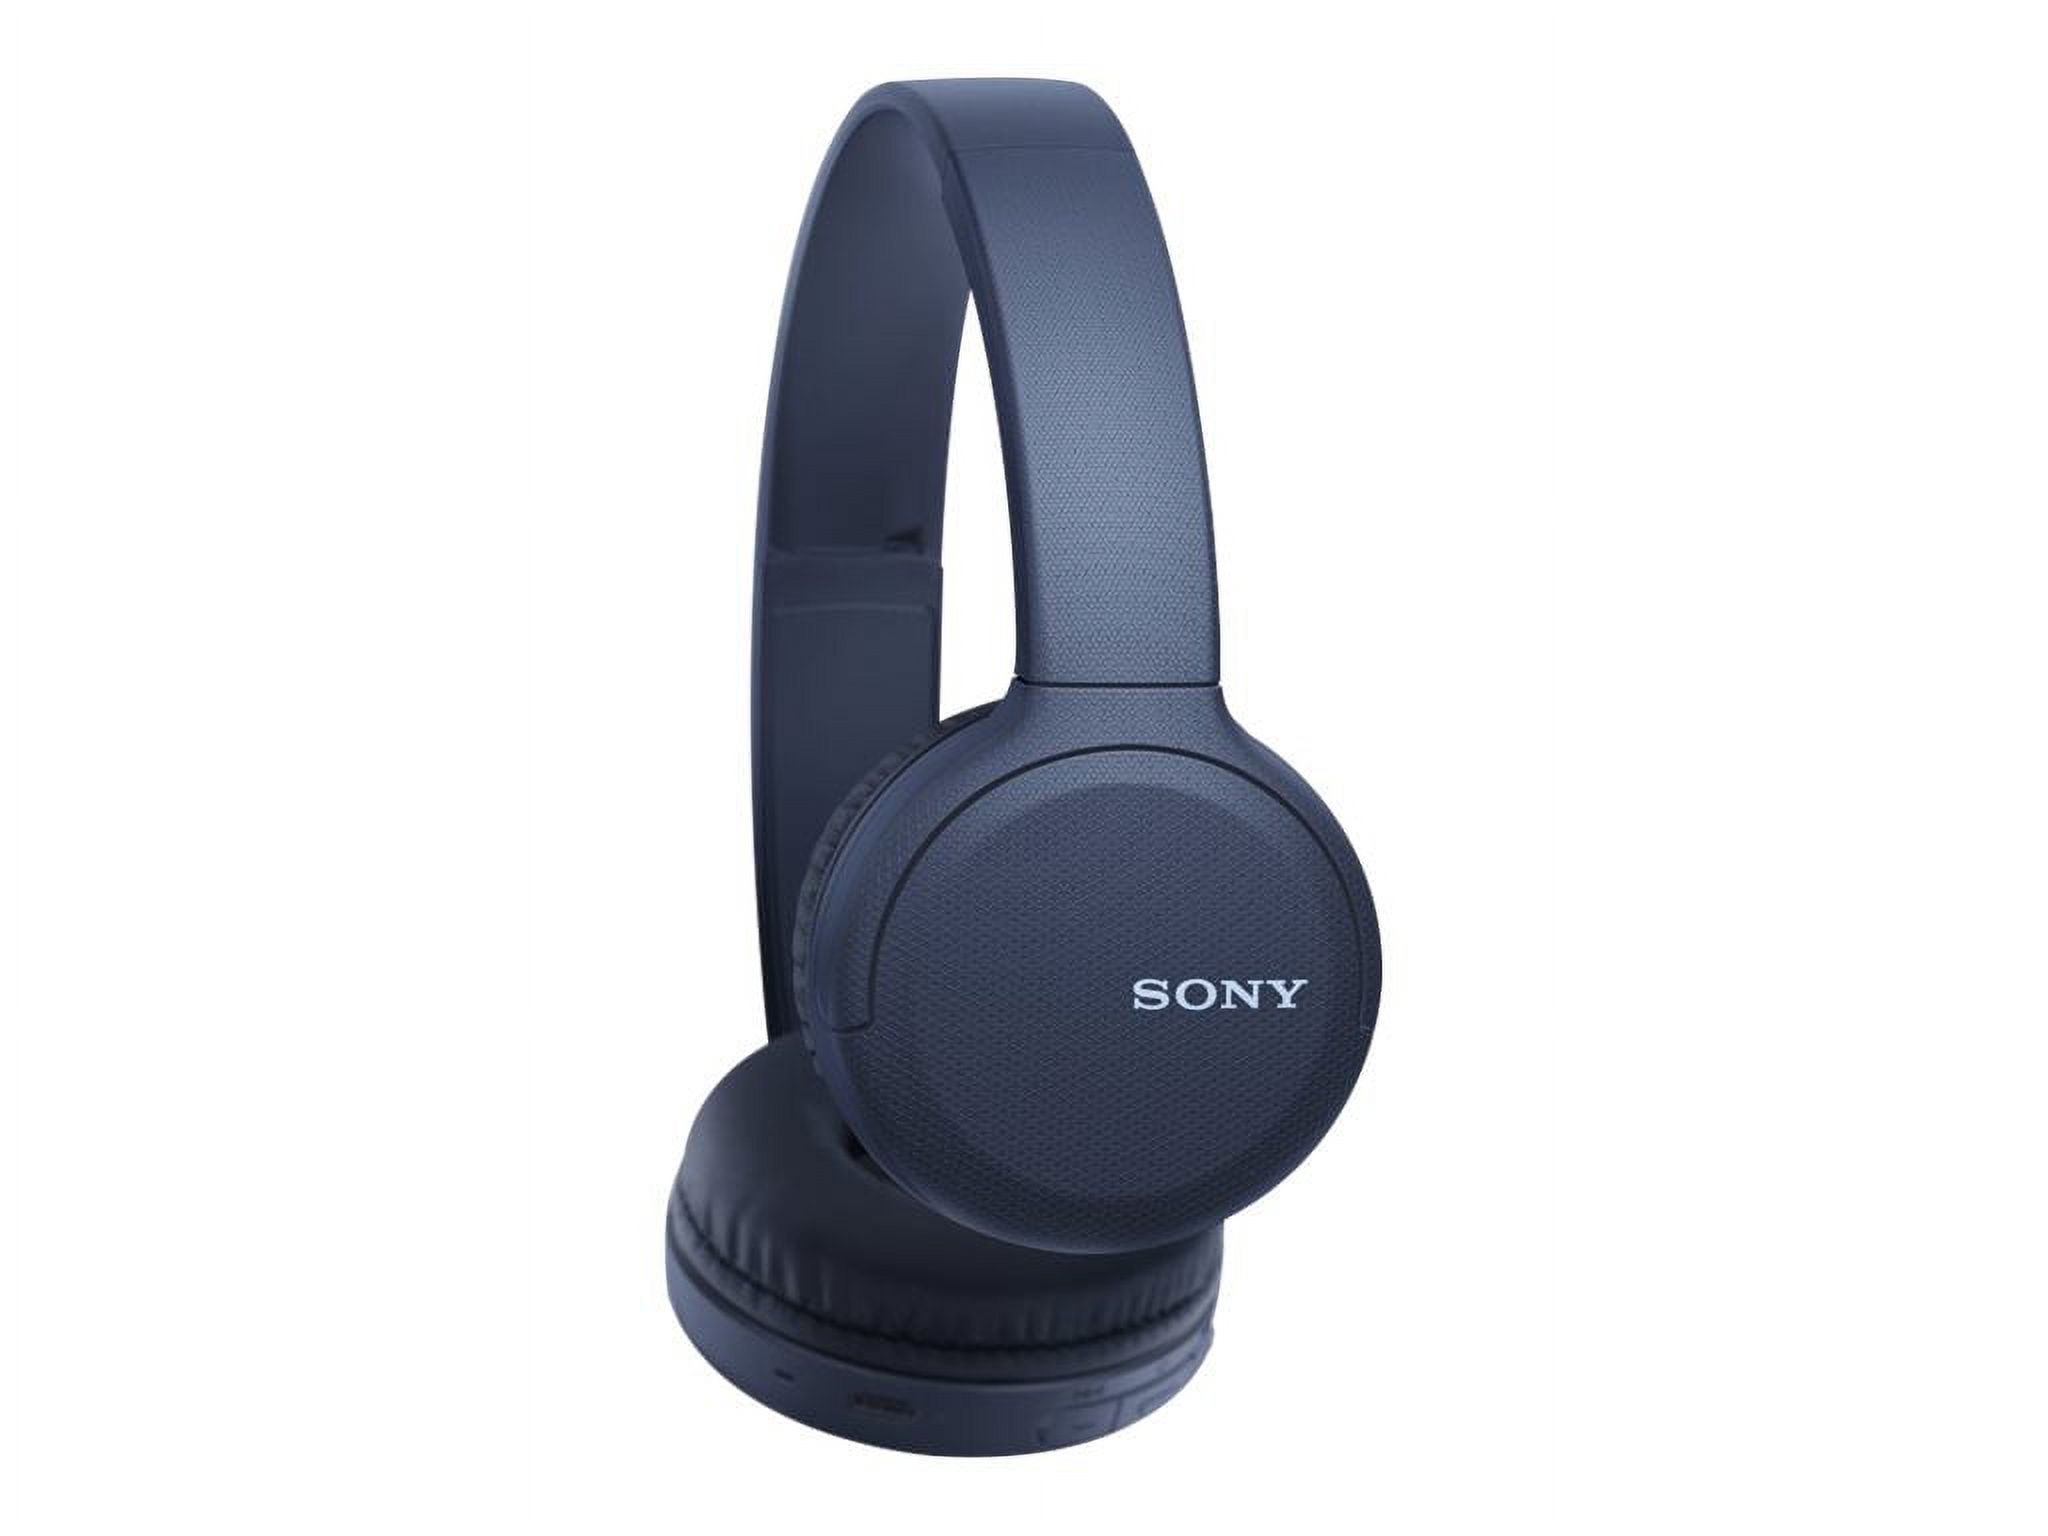 Sony WH-CH510 Wireless Headphones (Blue) - image 2 of 2